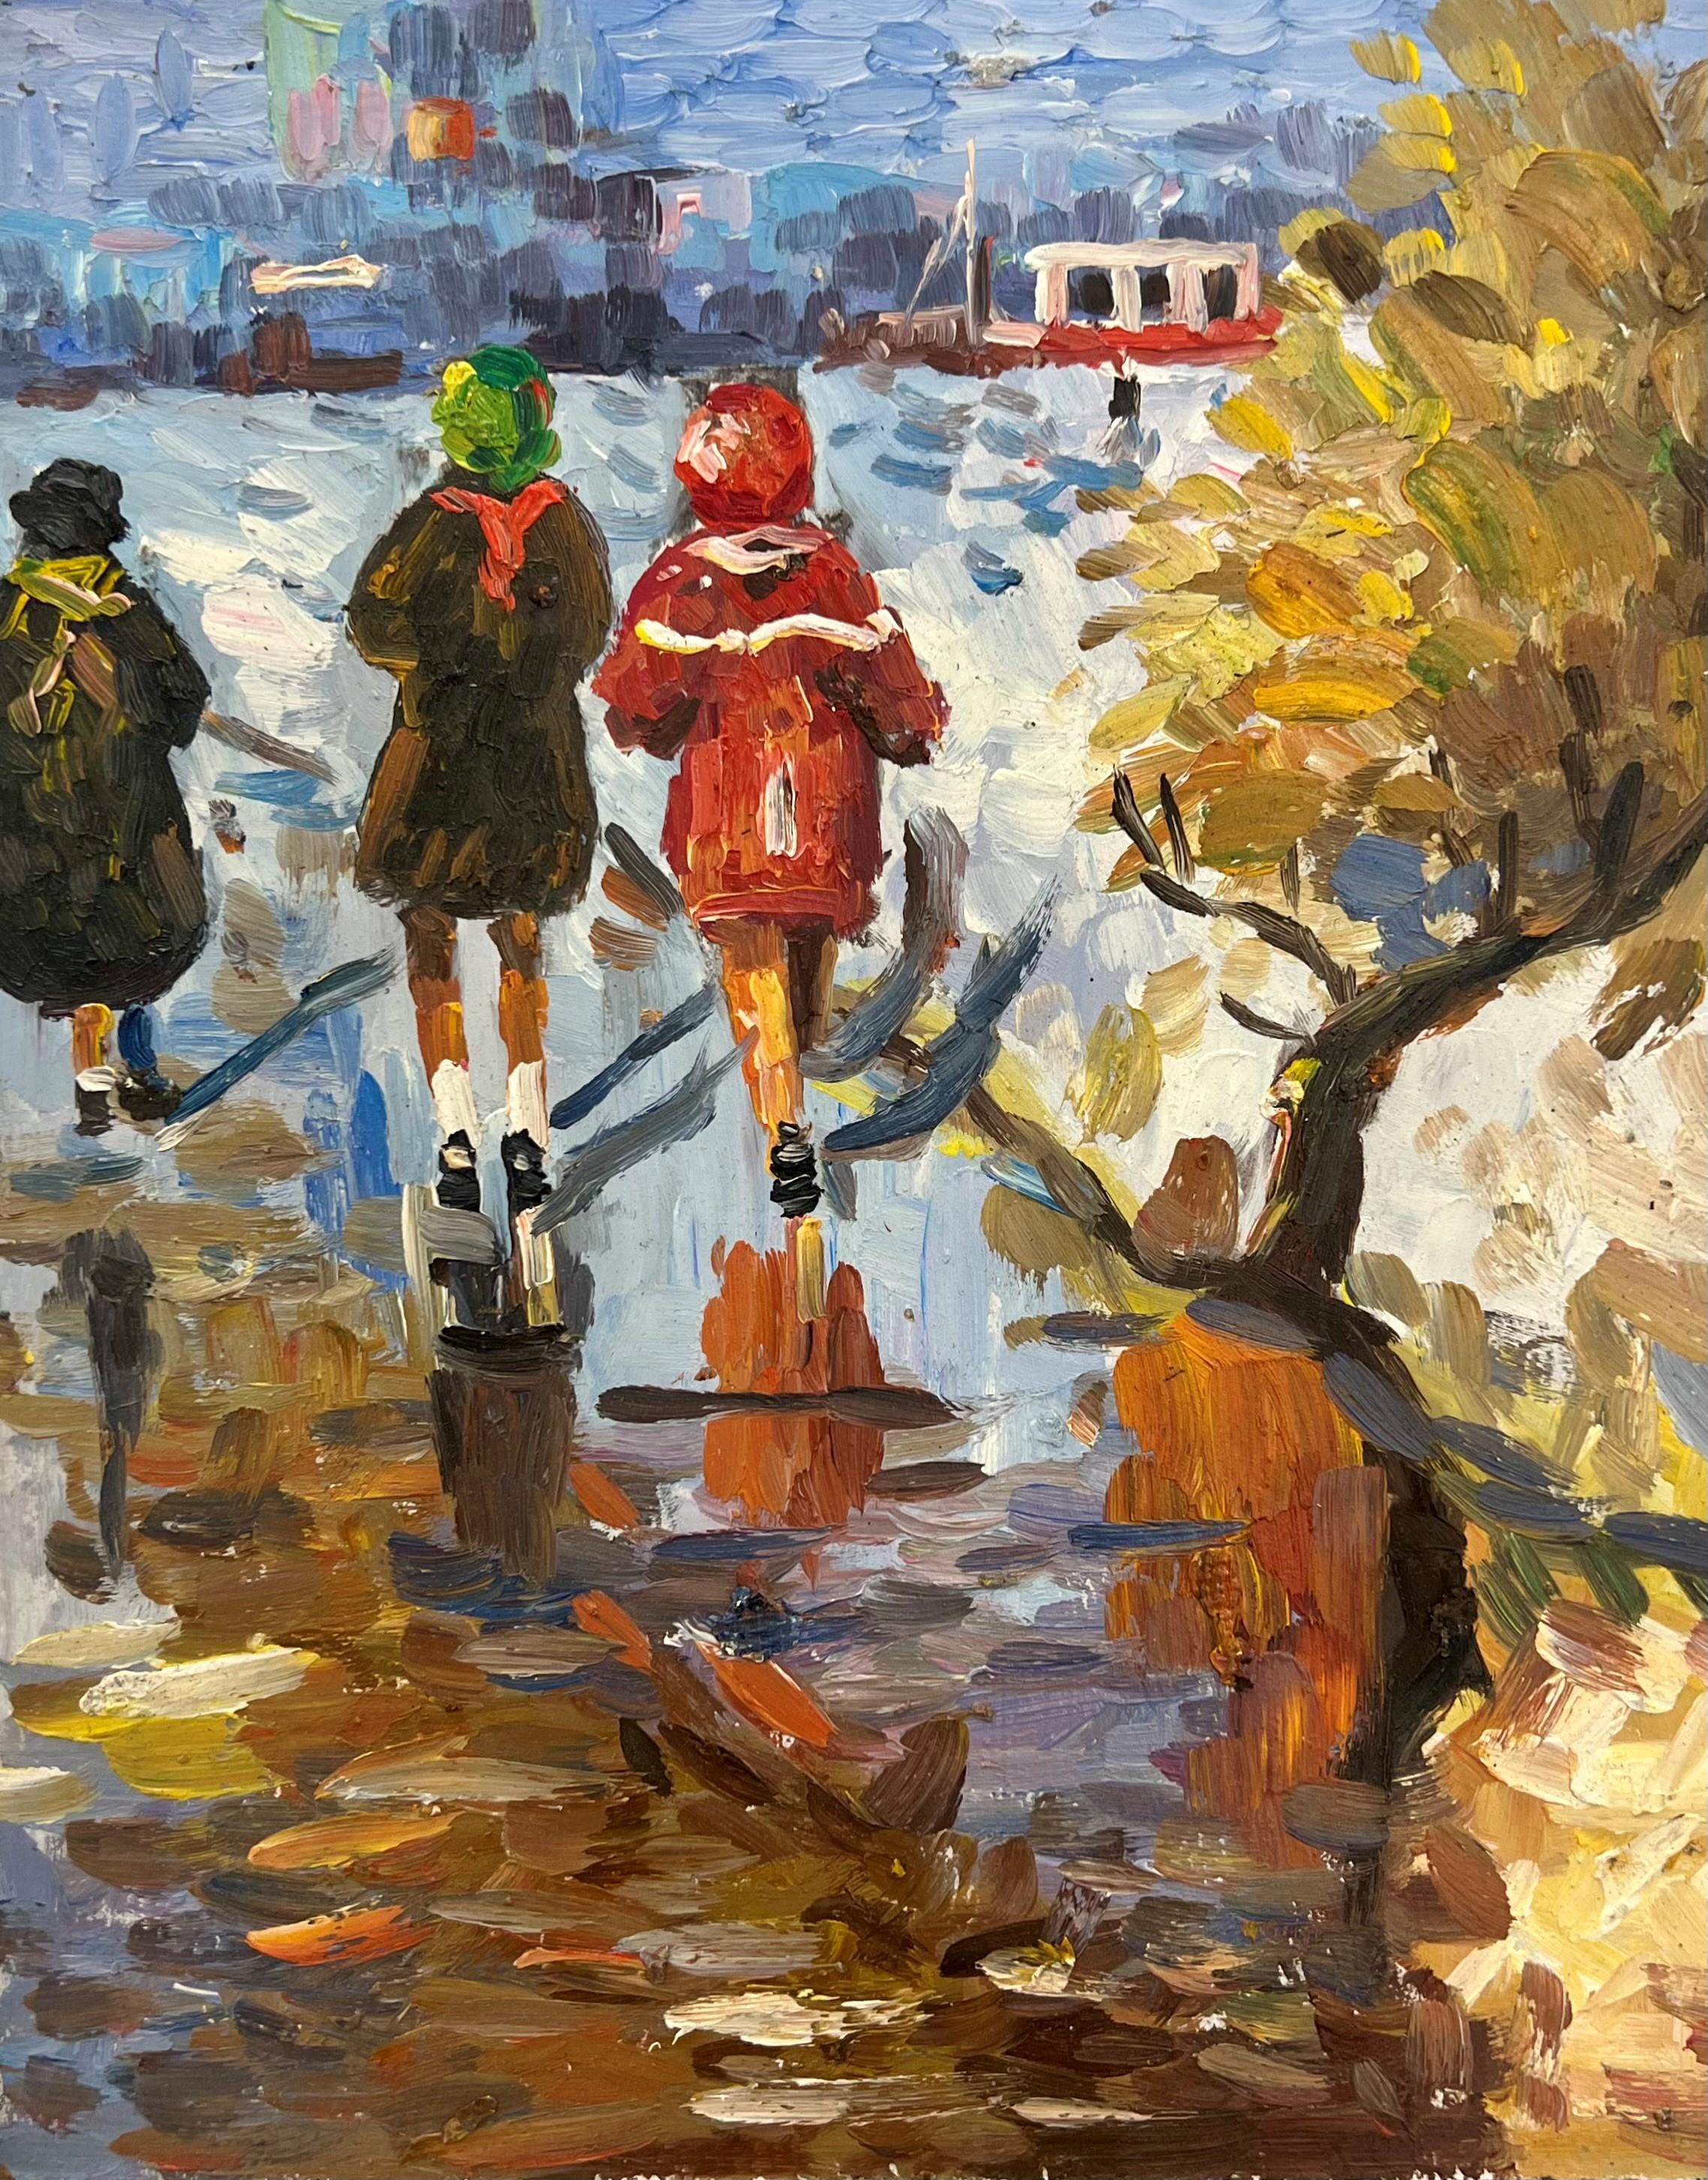 Unknown Figurative Painting - Snow Day, Impressionist Painterly figurative oil painting on board